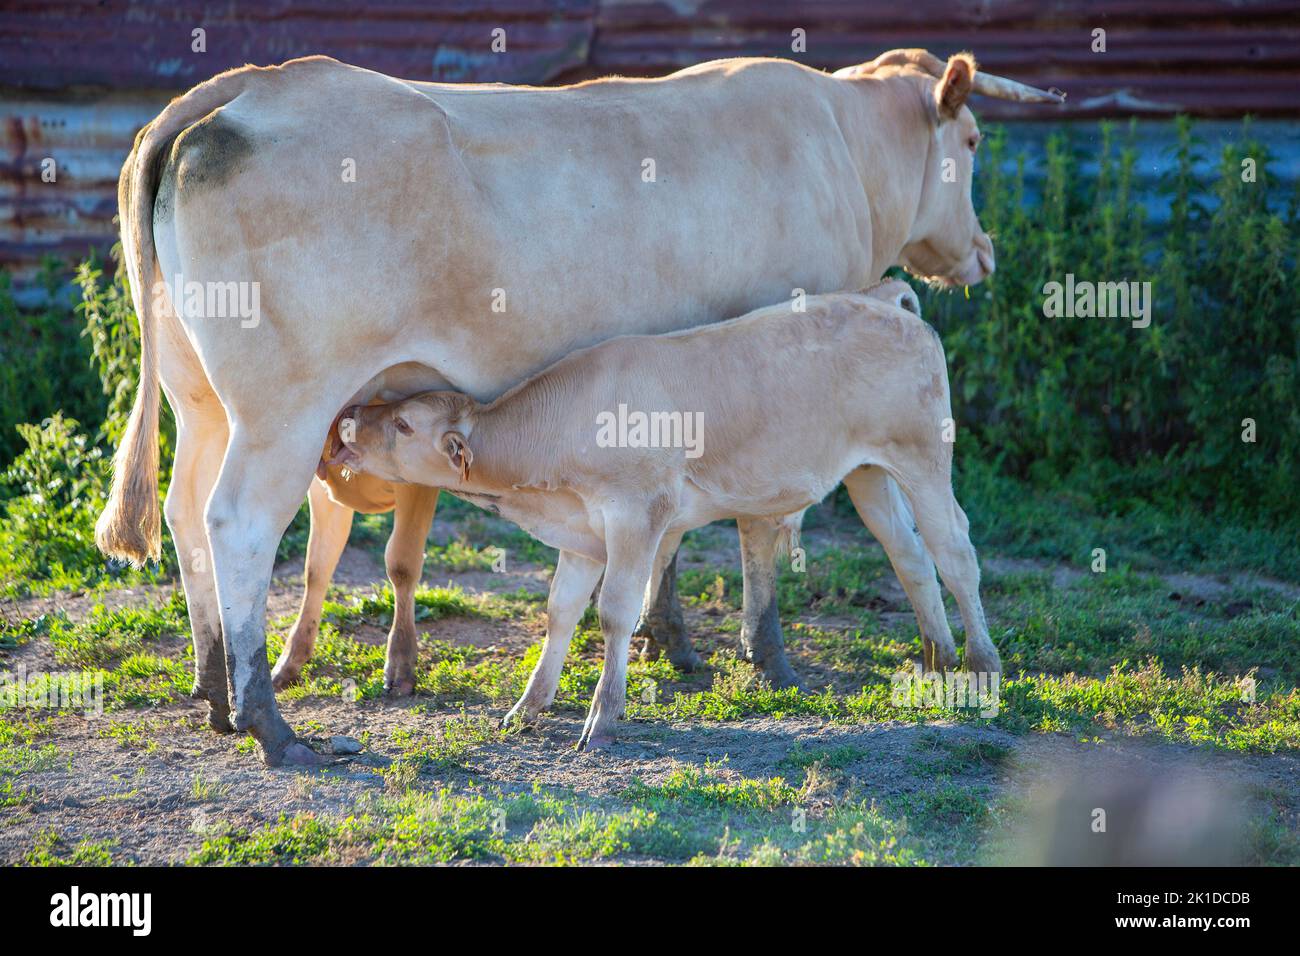 calf drinks from mother cow in backlight Stock Photo